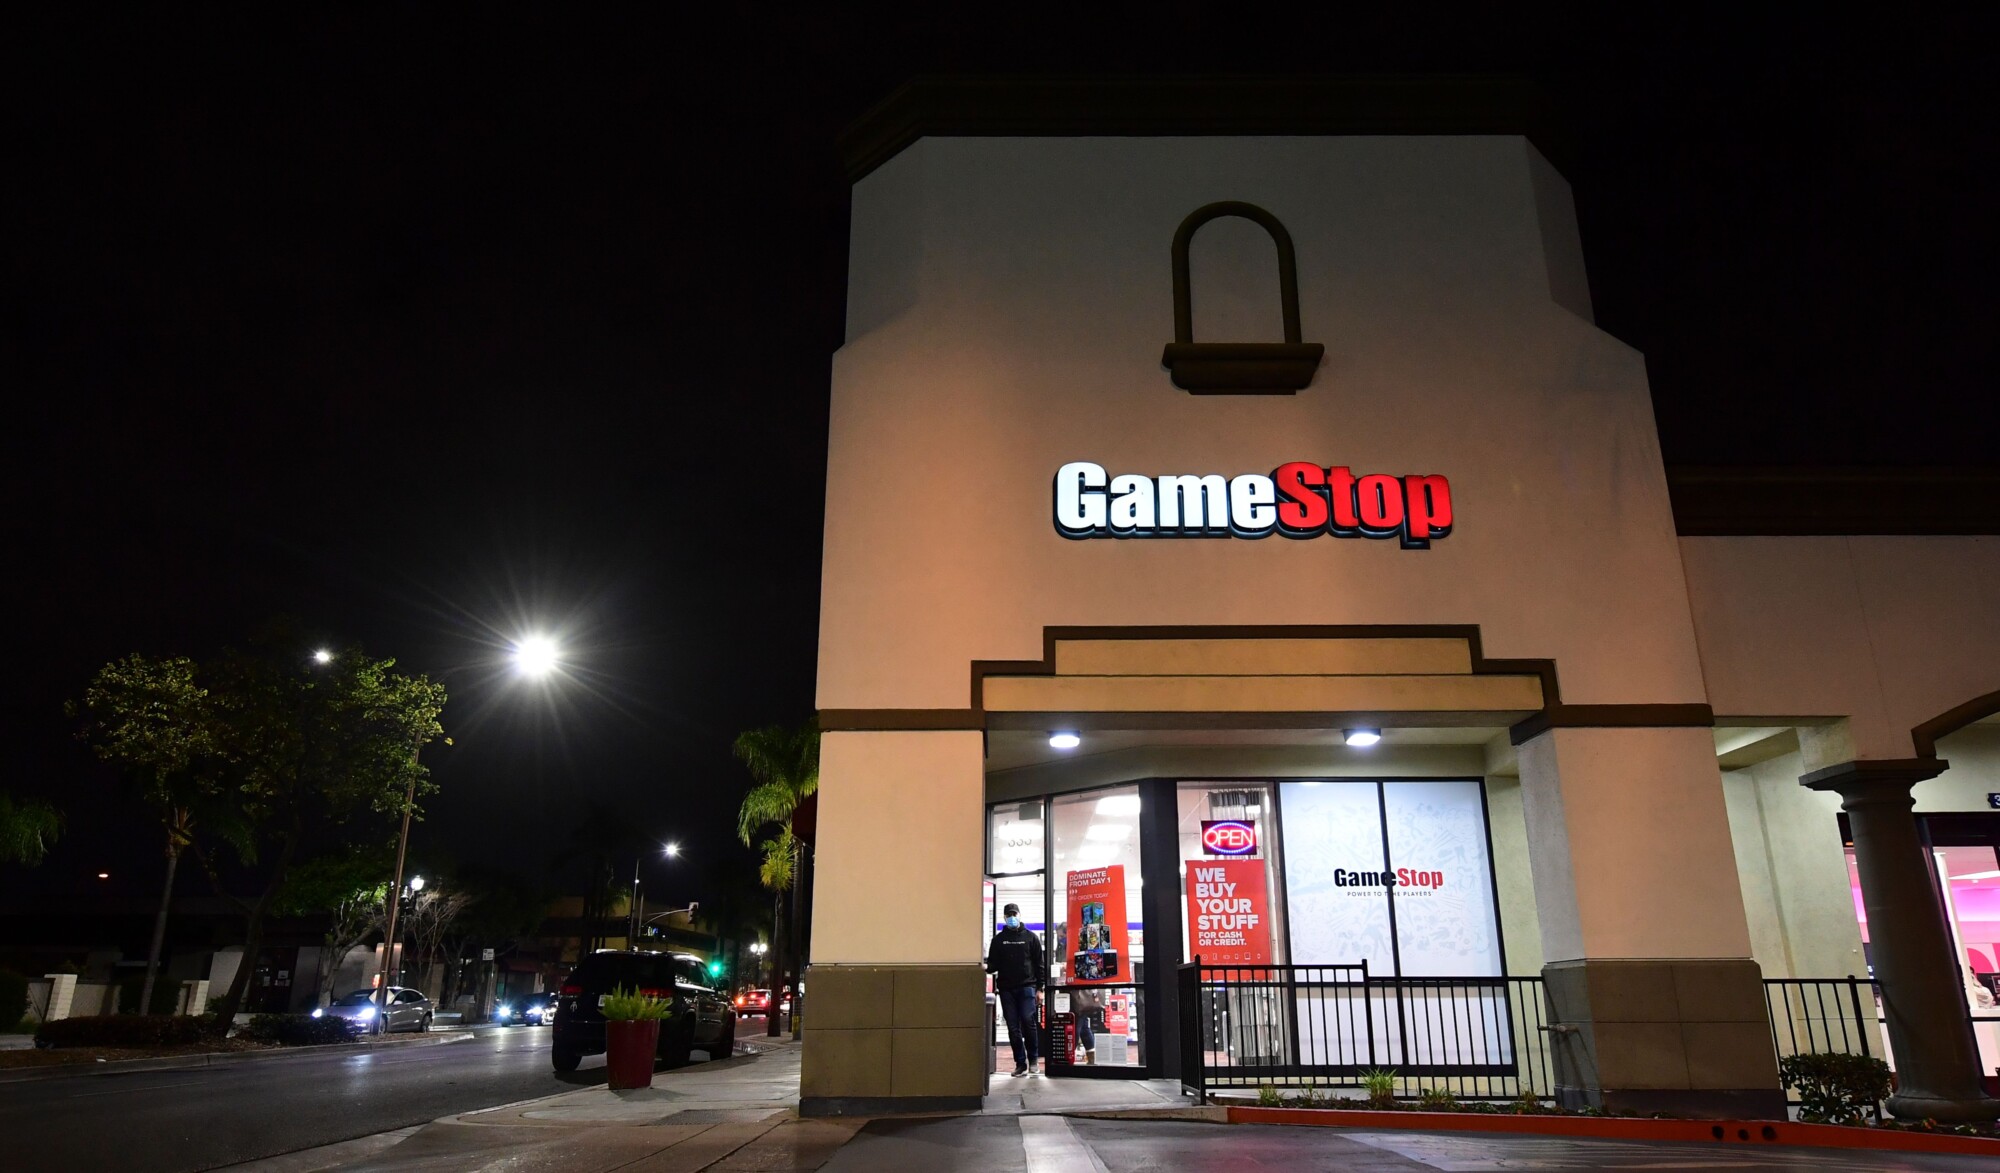 What’s Happening With the Gamestop Shares—Interview With Charles Mizrahi